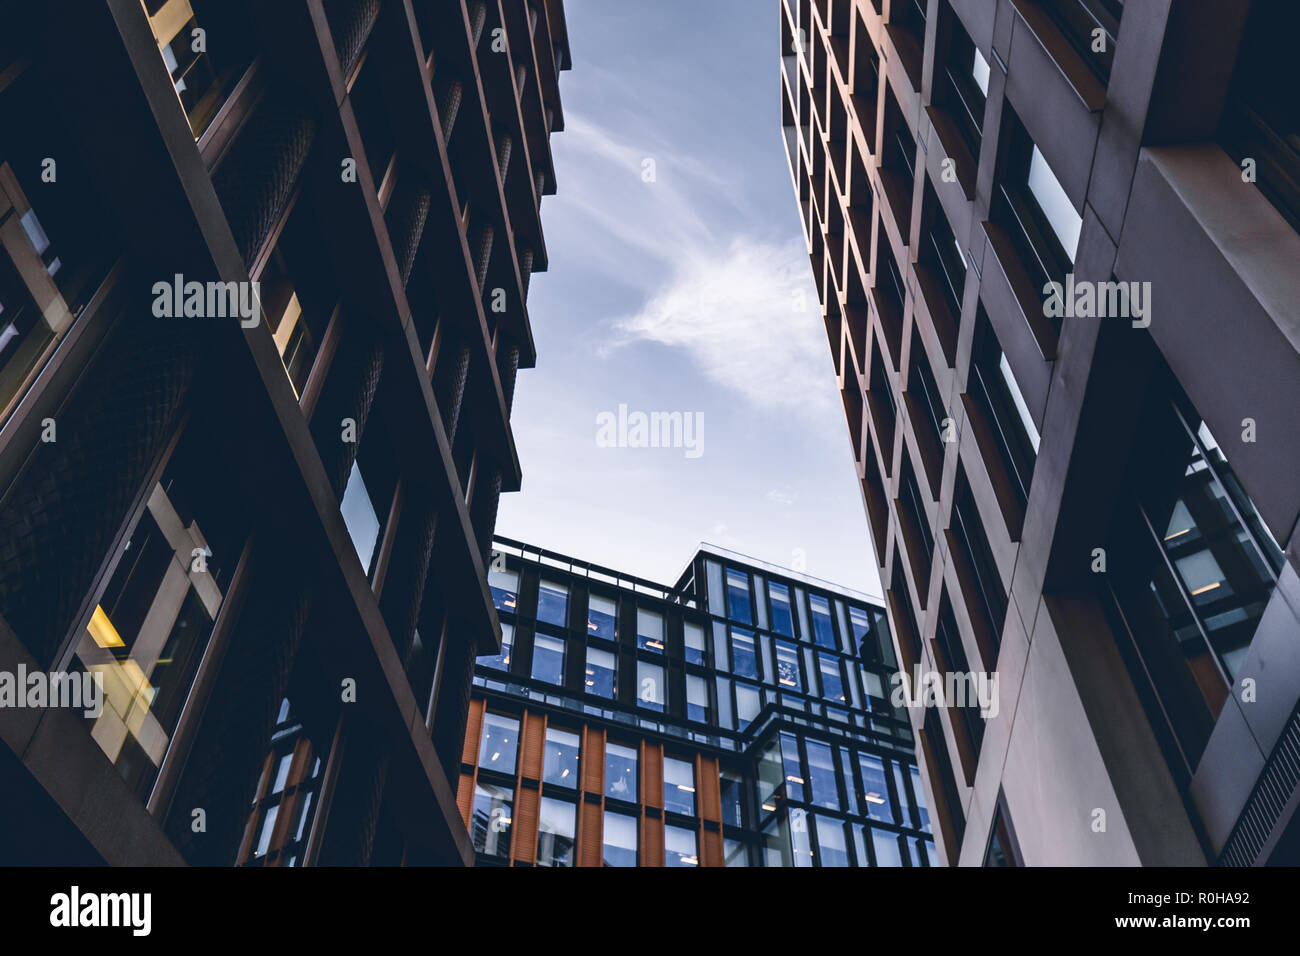 Low angle view of modern architecture buildings in London Stock Photo